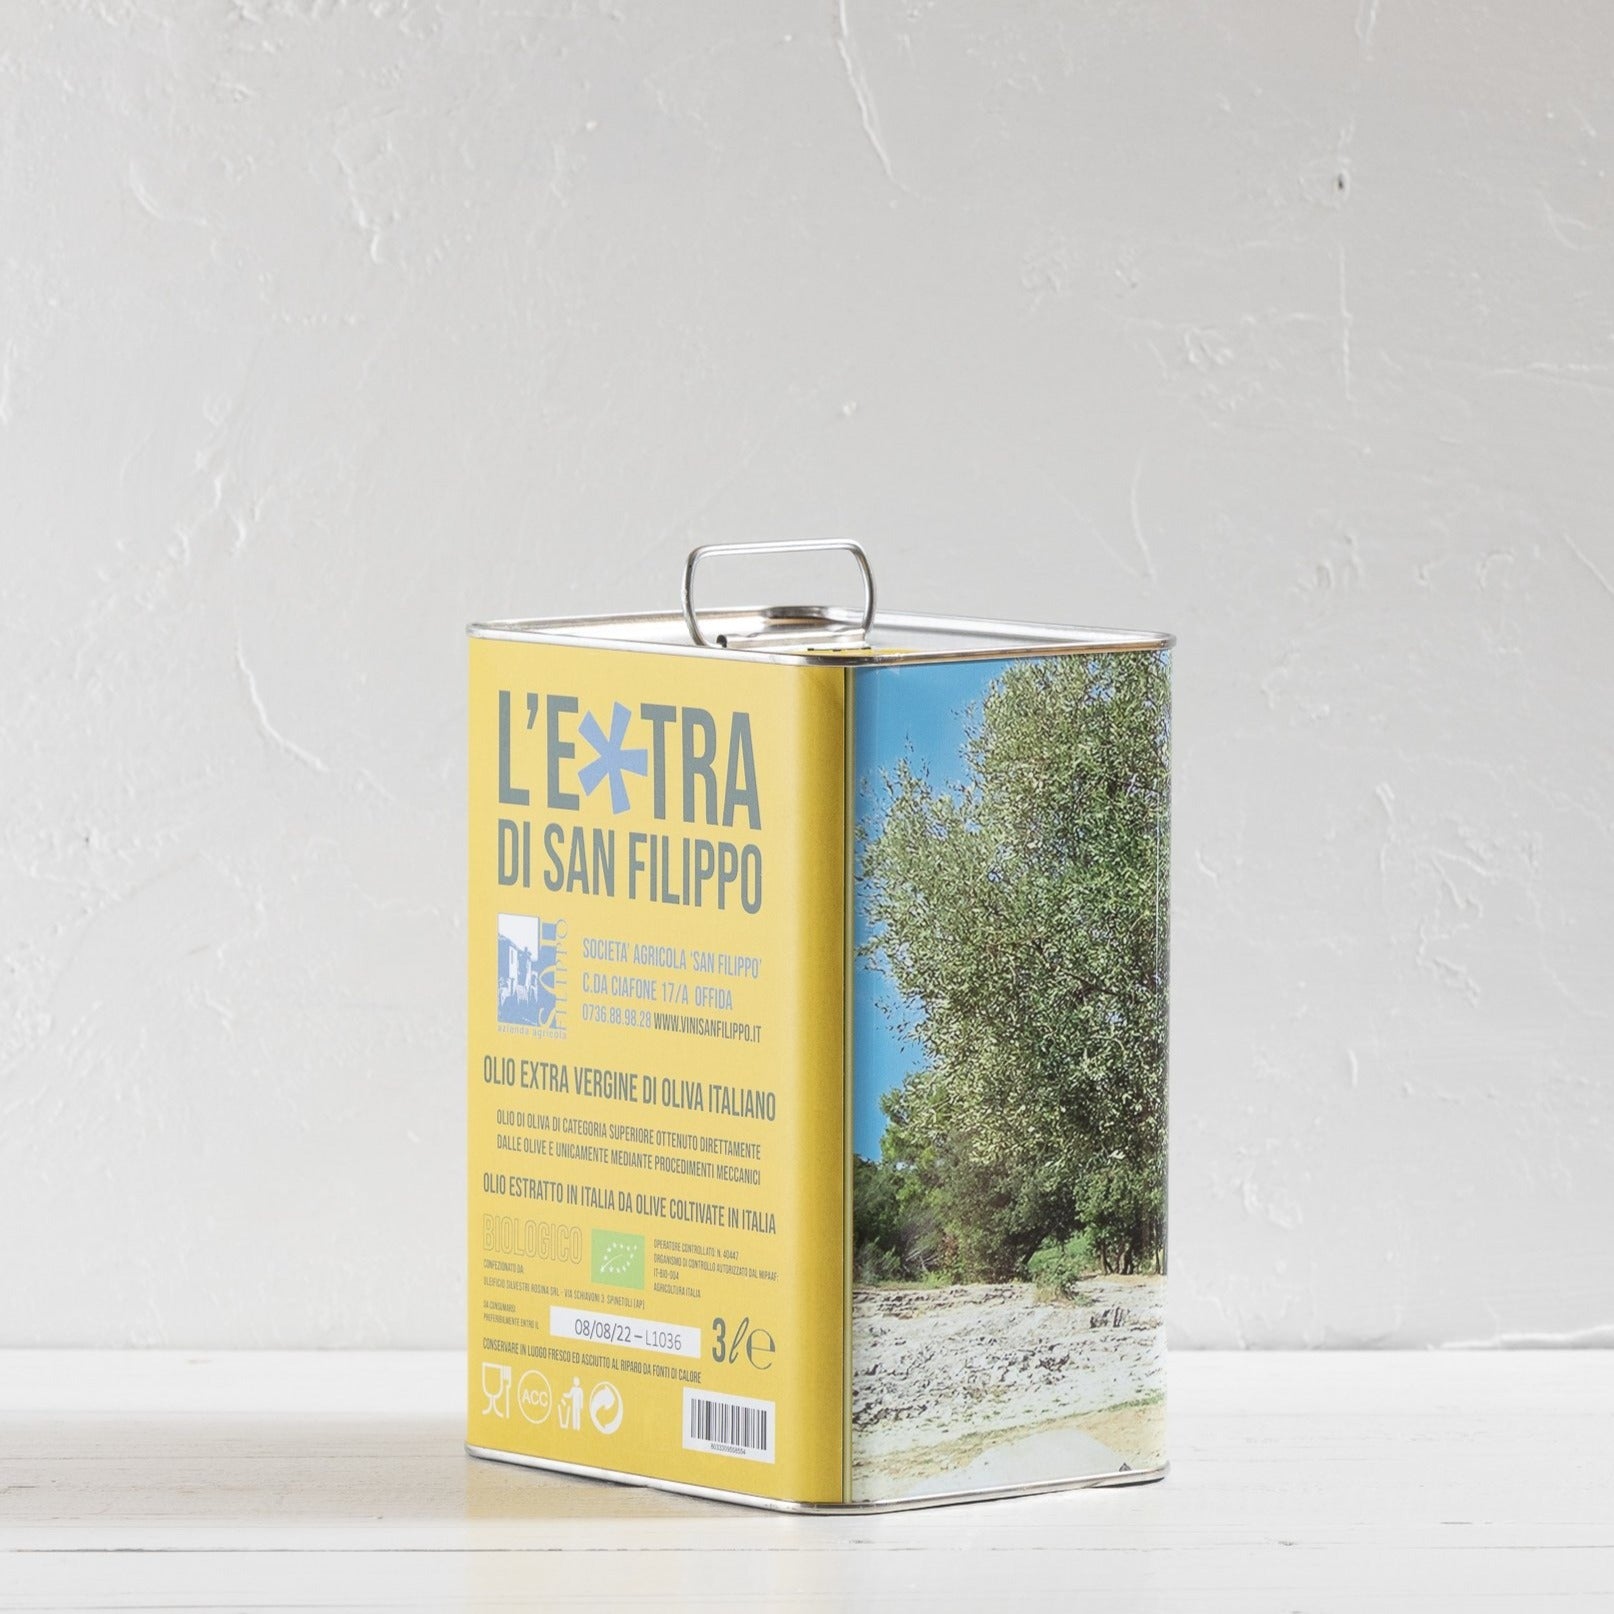 OLIVE OIL L’EXTRA BY SAN FILIPPO